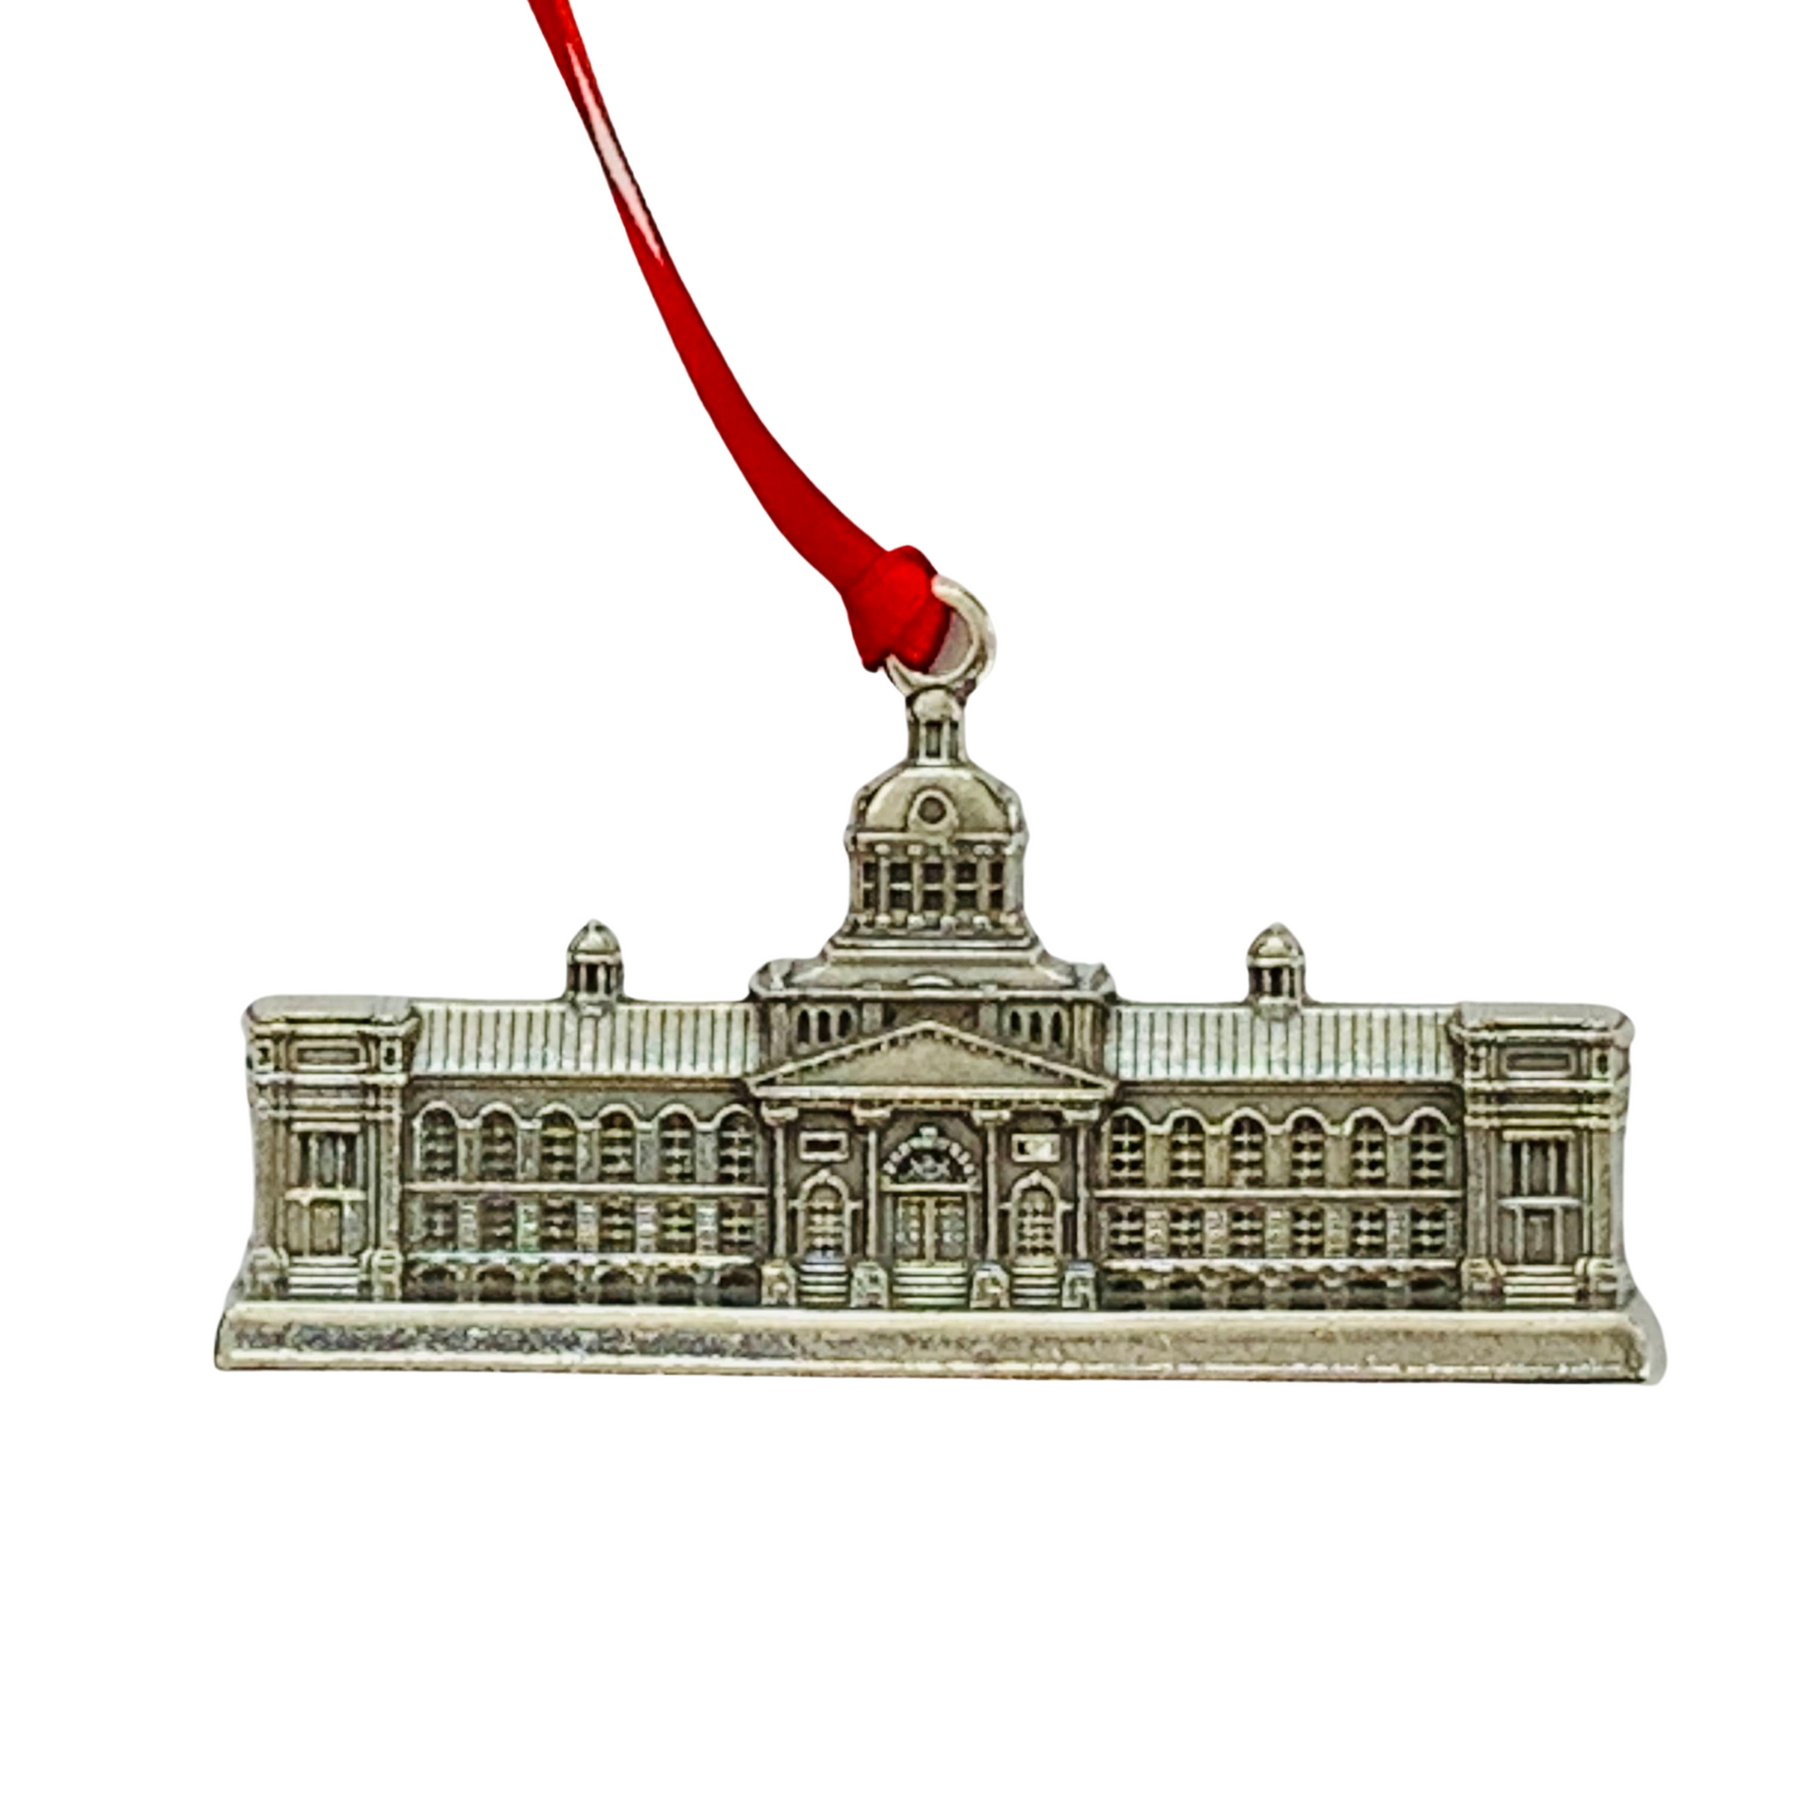 1997 Pewter - City Hall (reprint edition)